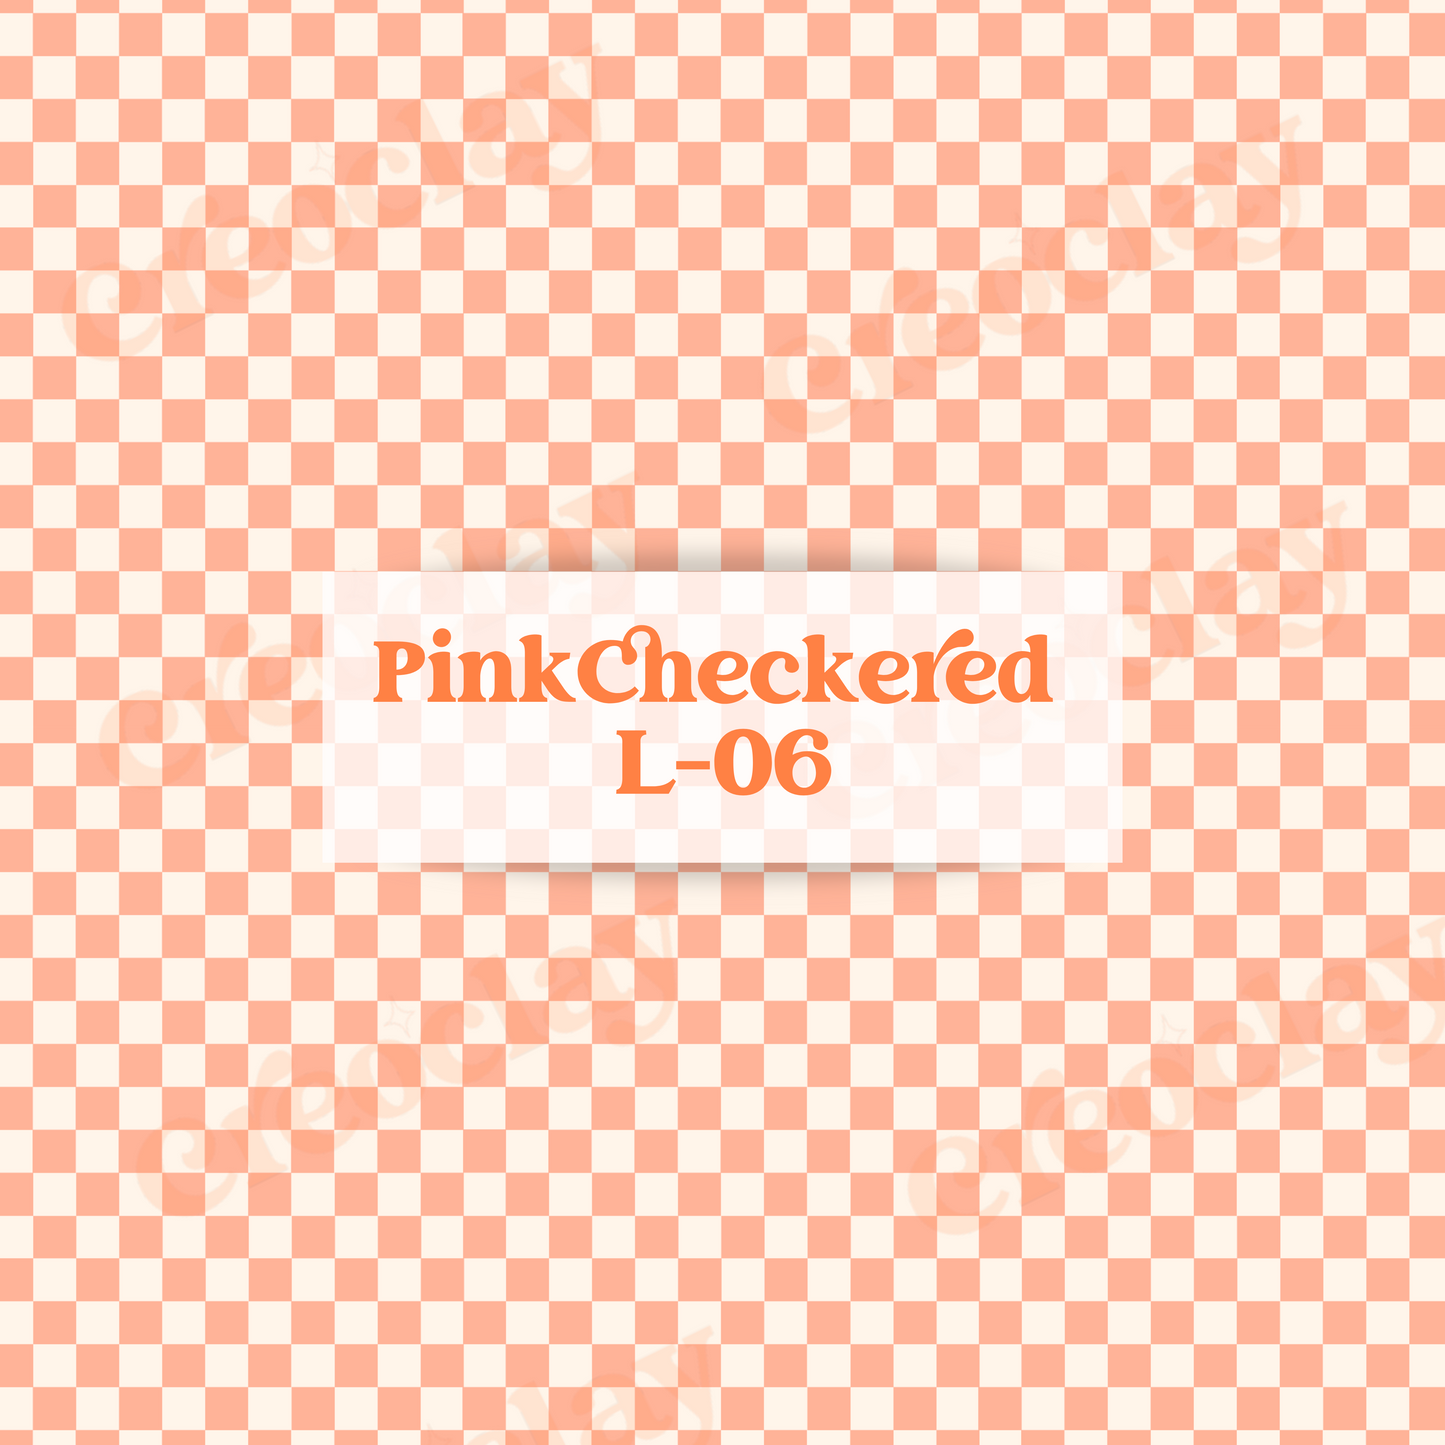 Transfer Paper 94 (Pink Checkered)